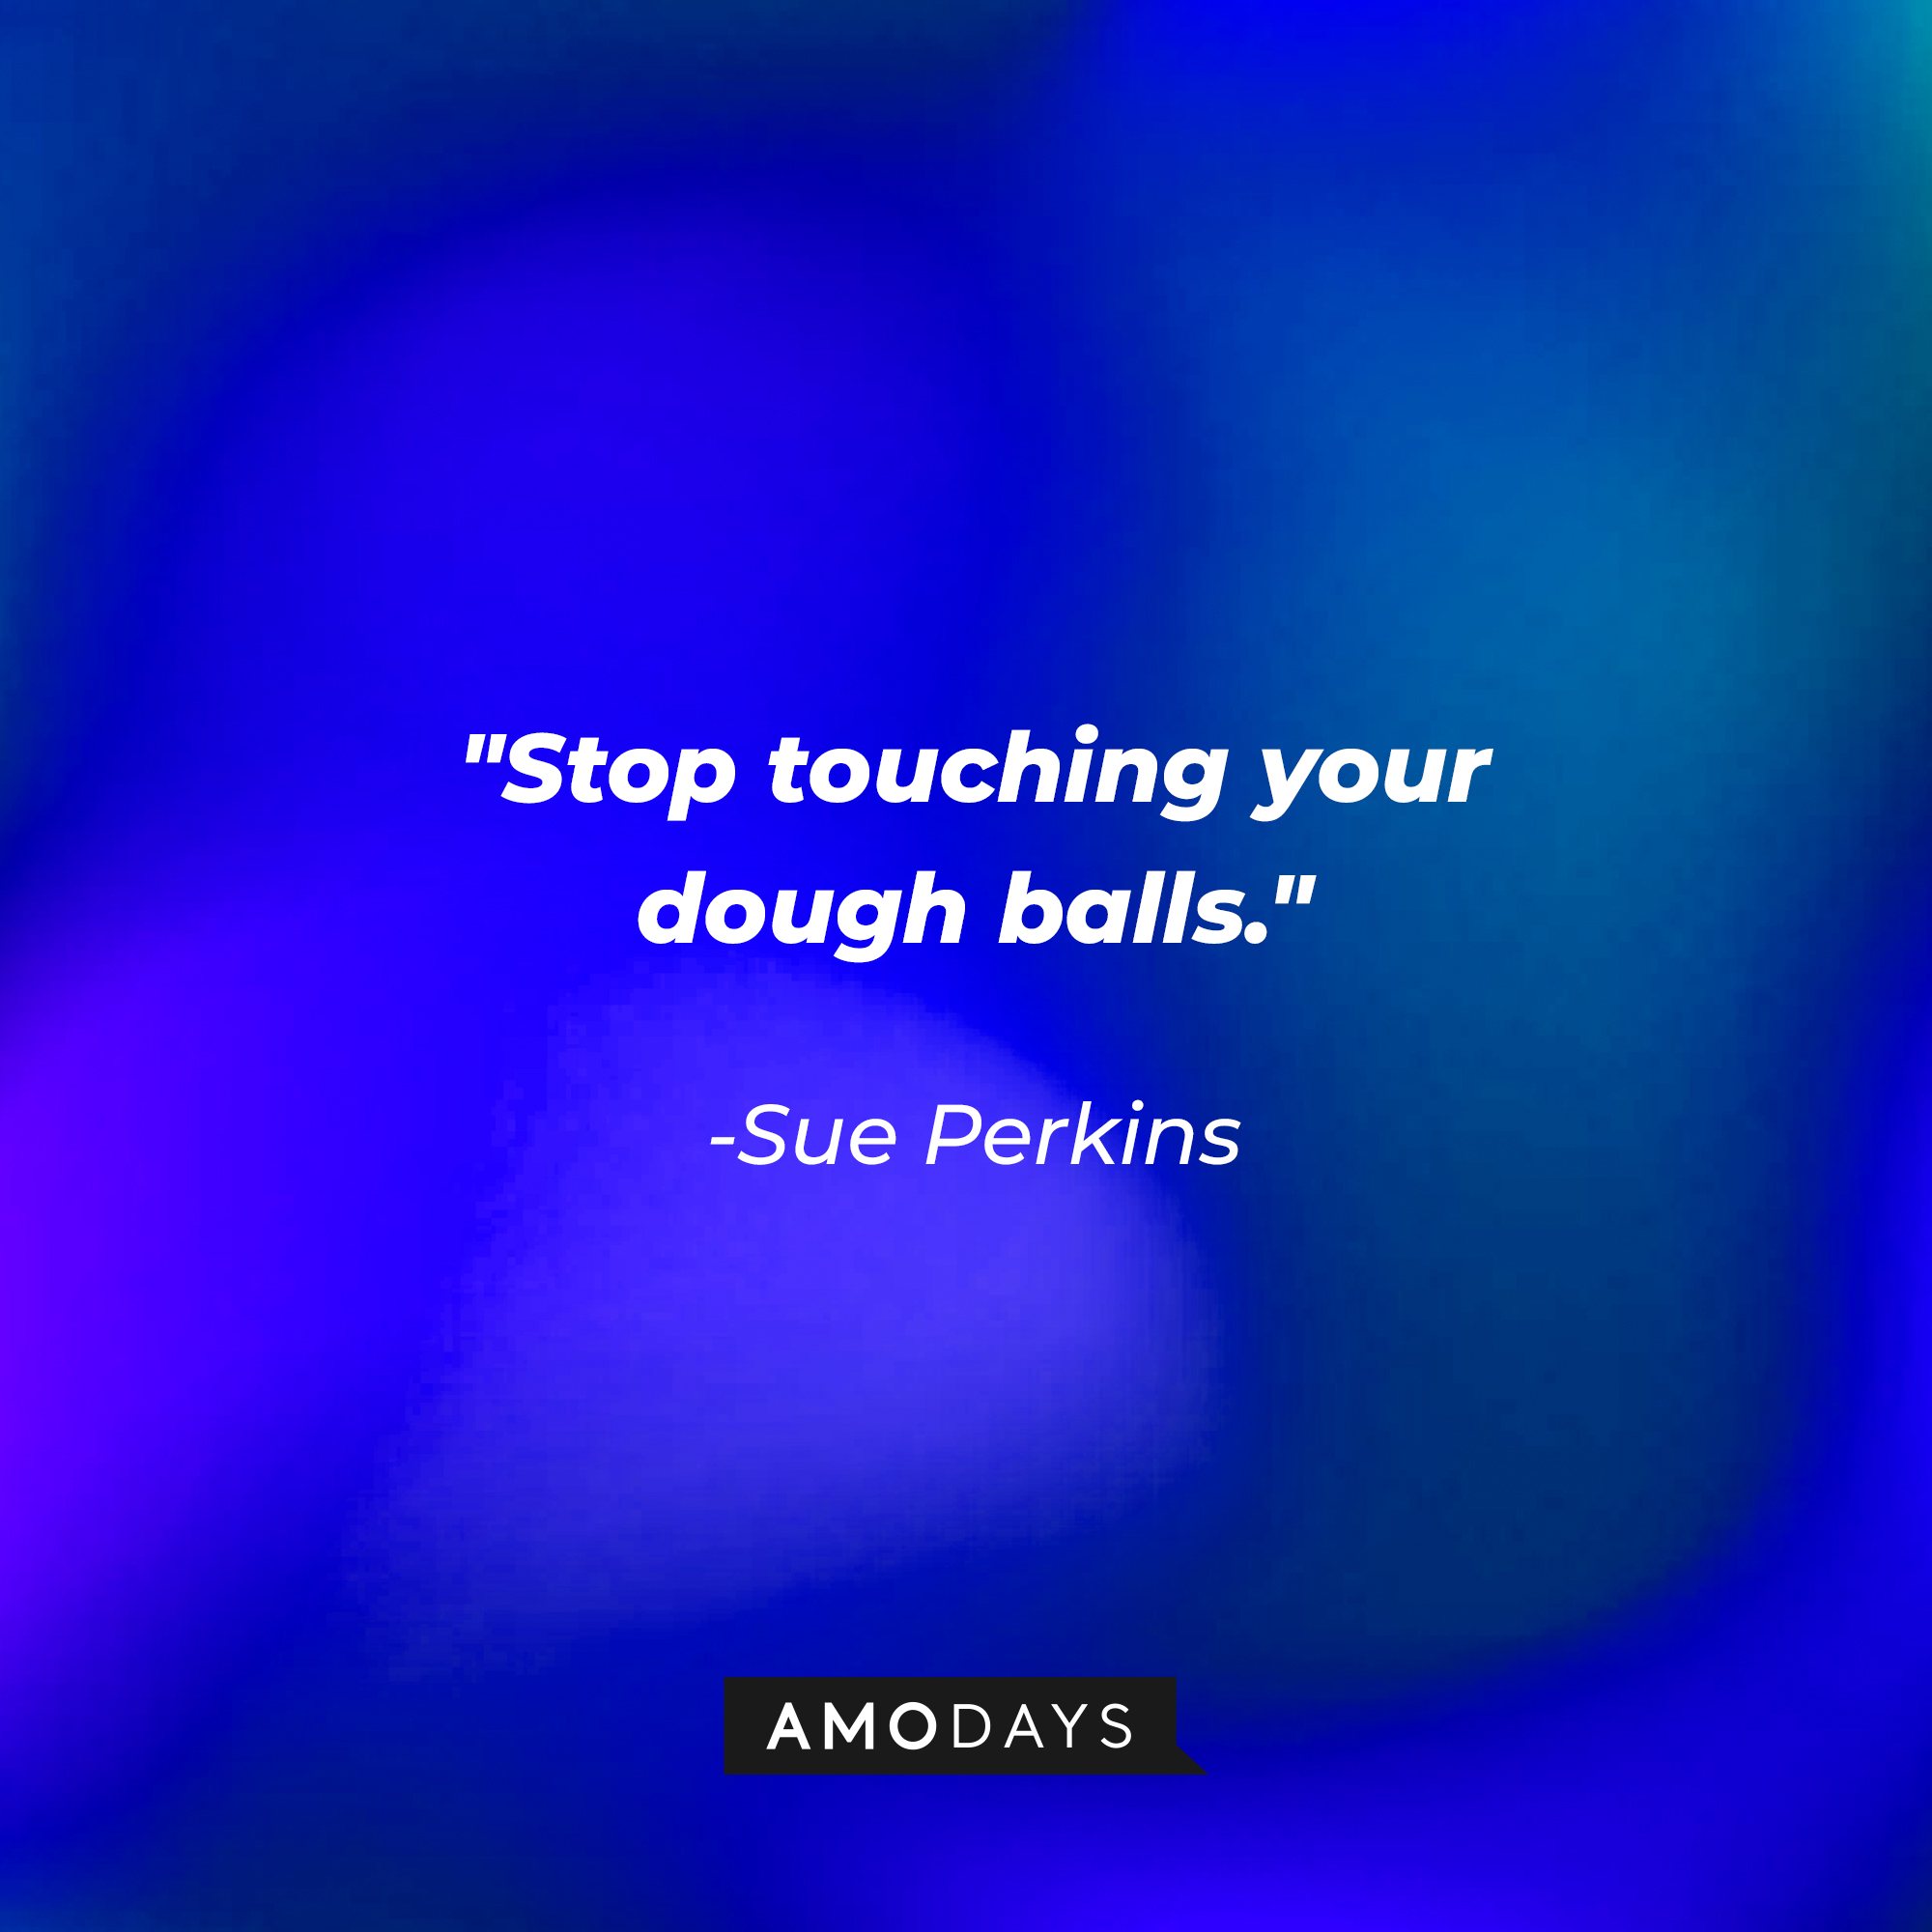 Sue Perkins' quote: "Stop touching your dough balls." | AmoDays